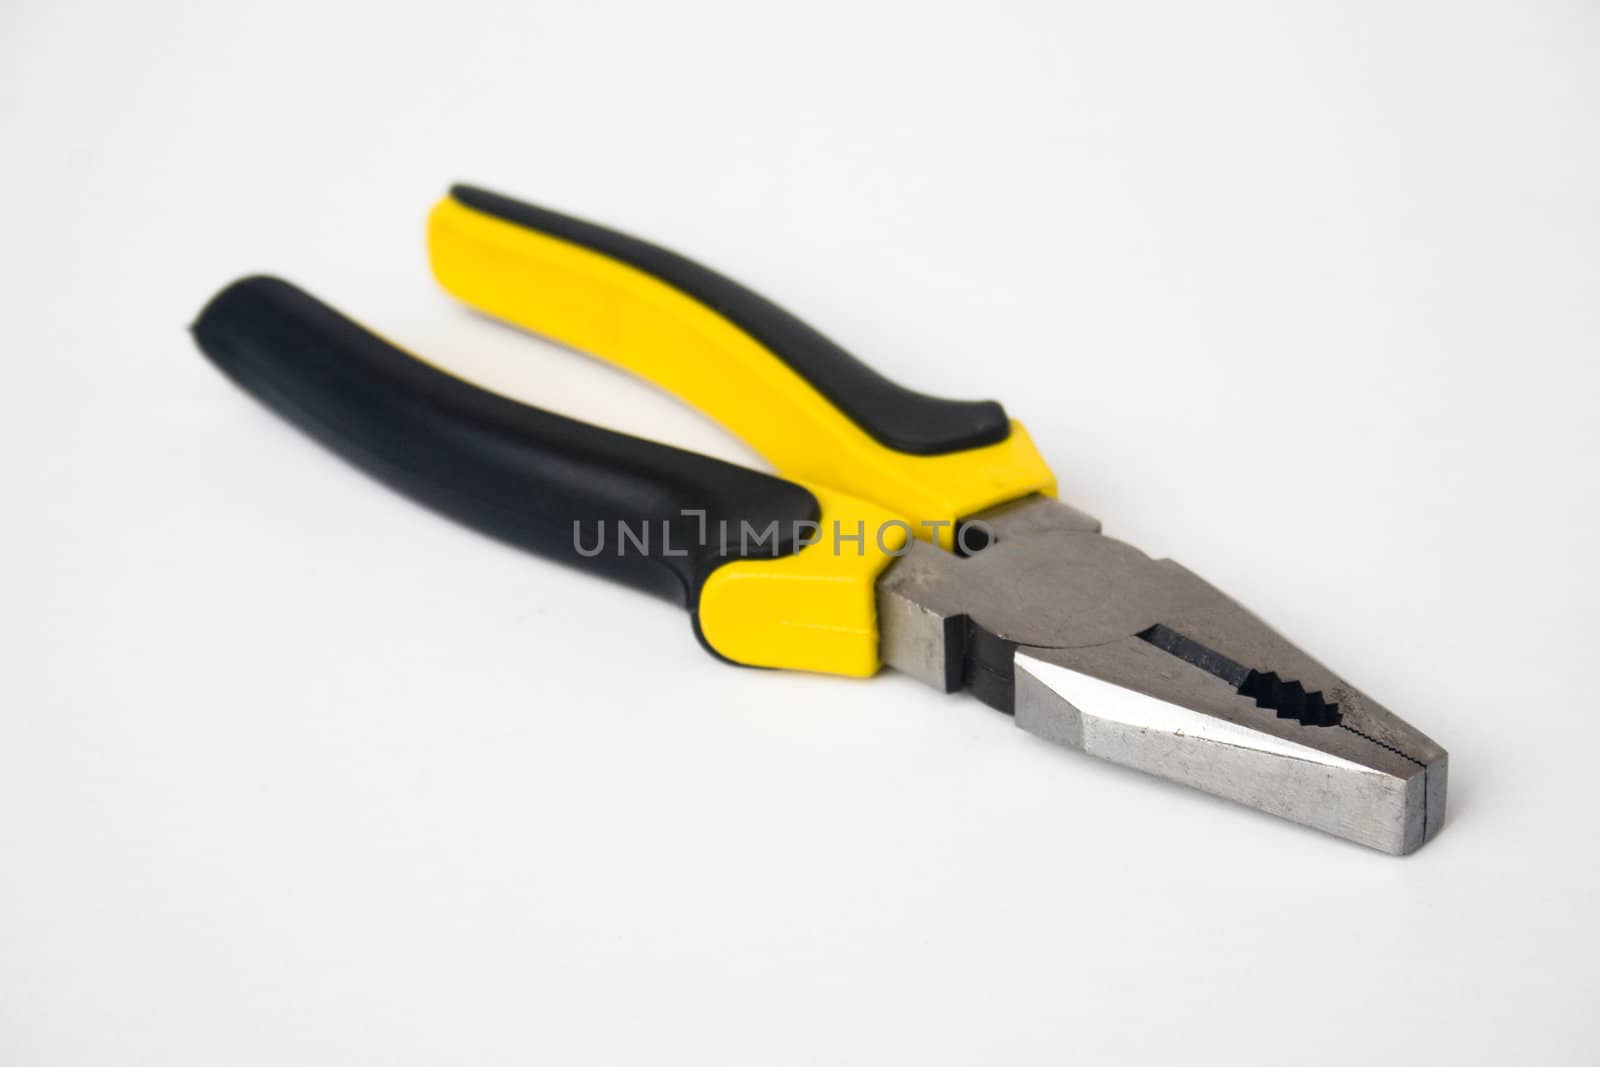 Pliers by timscottrom